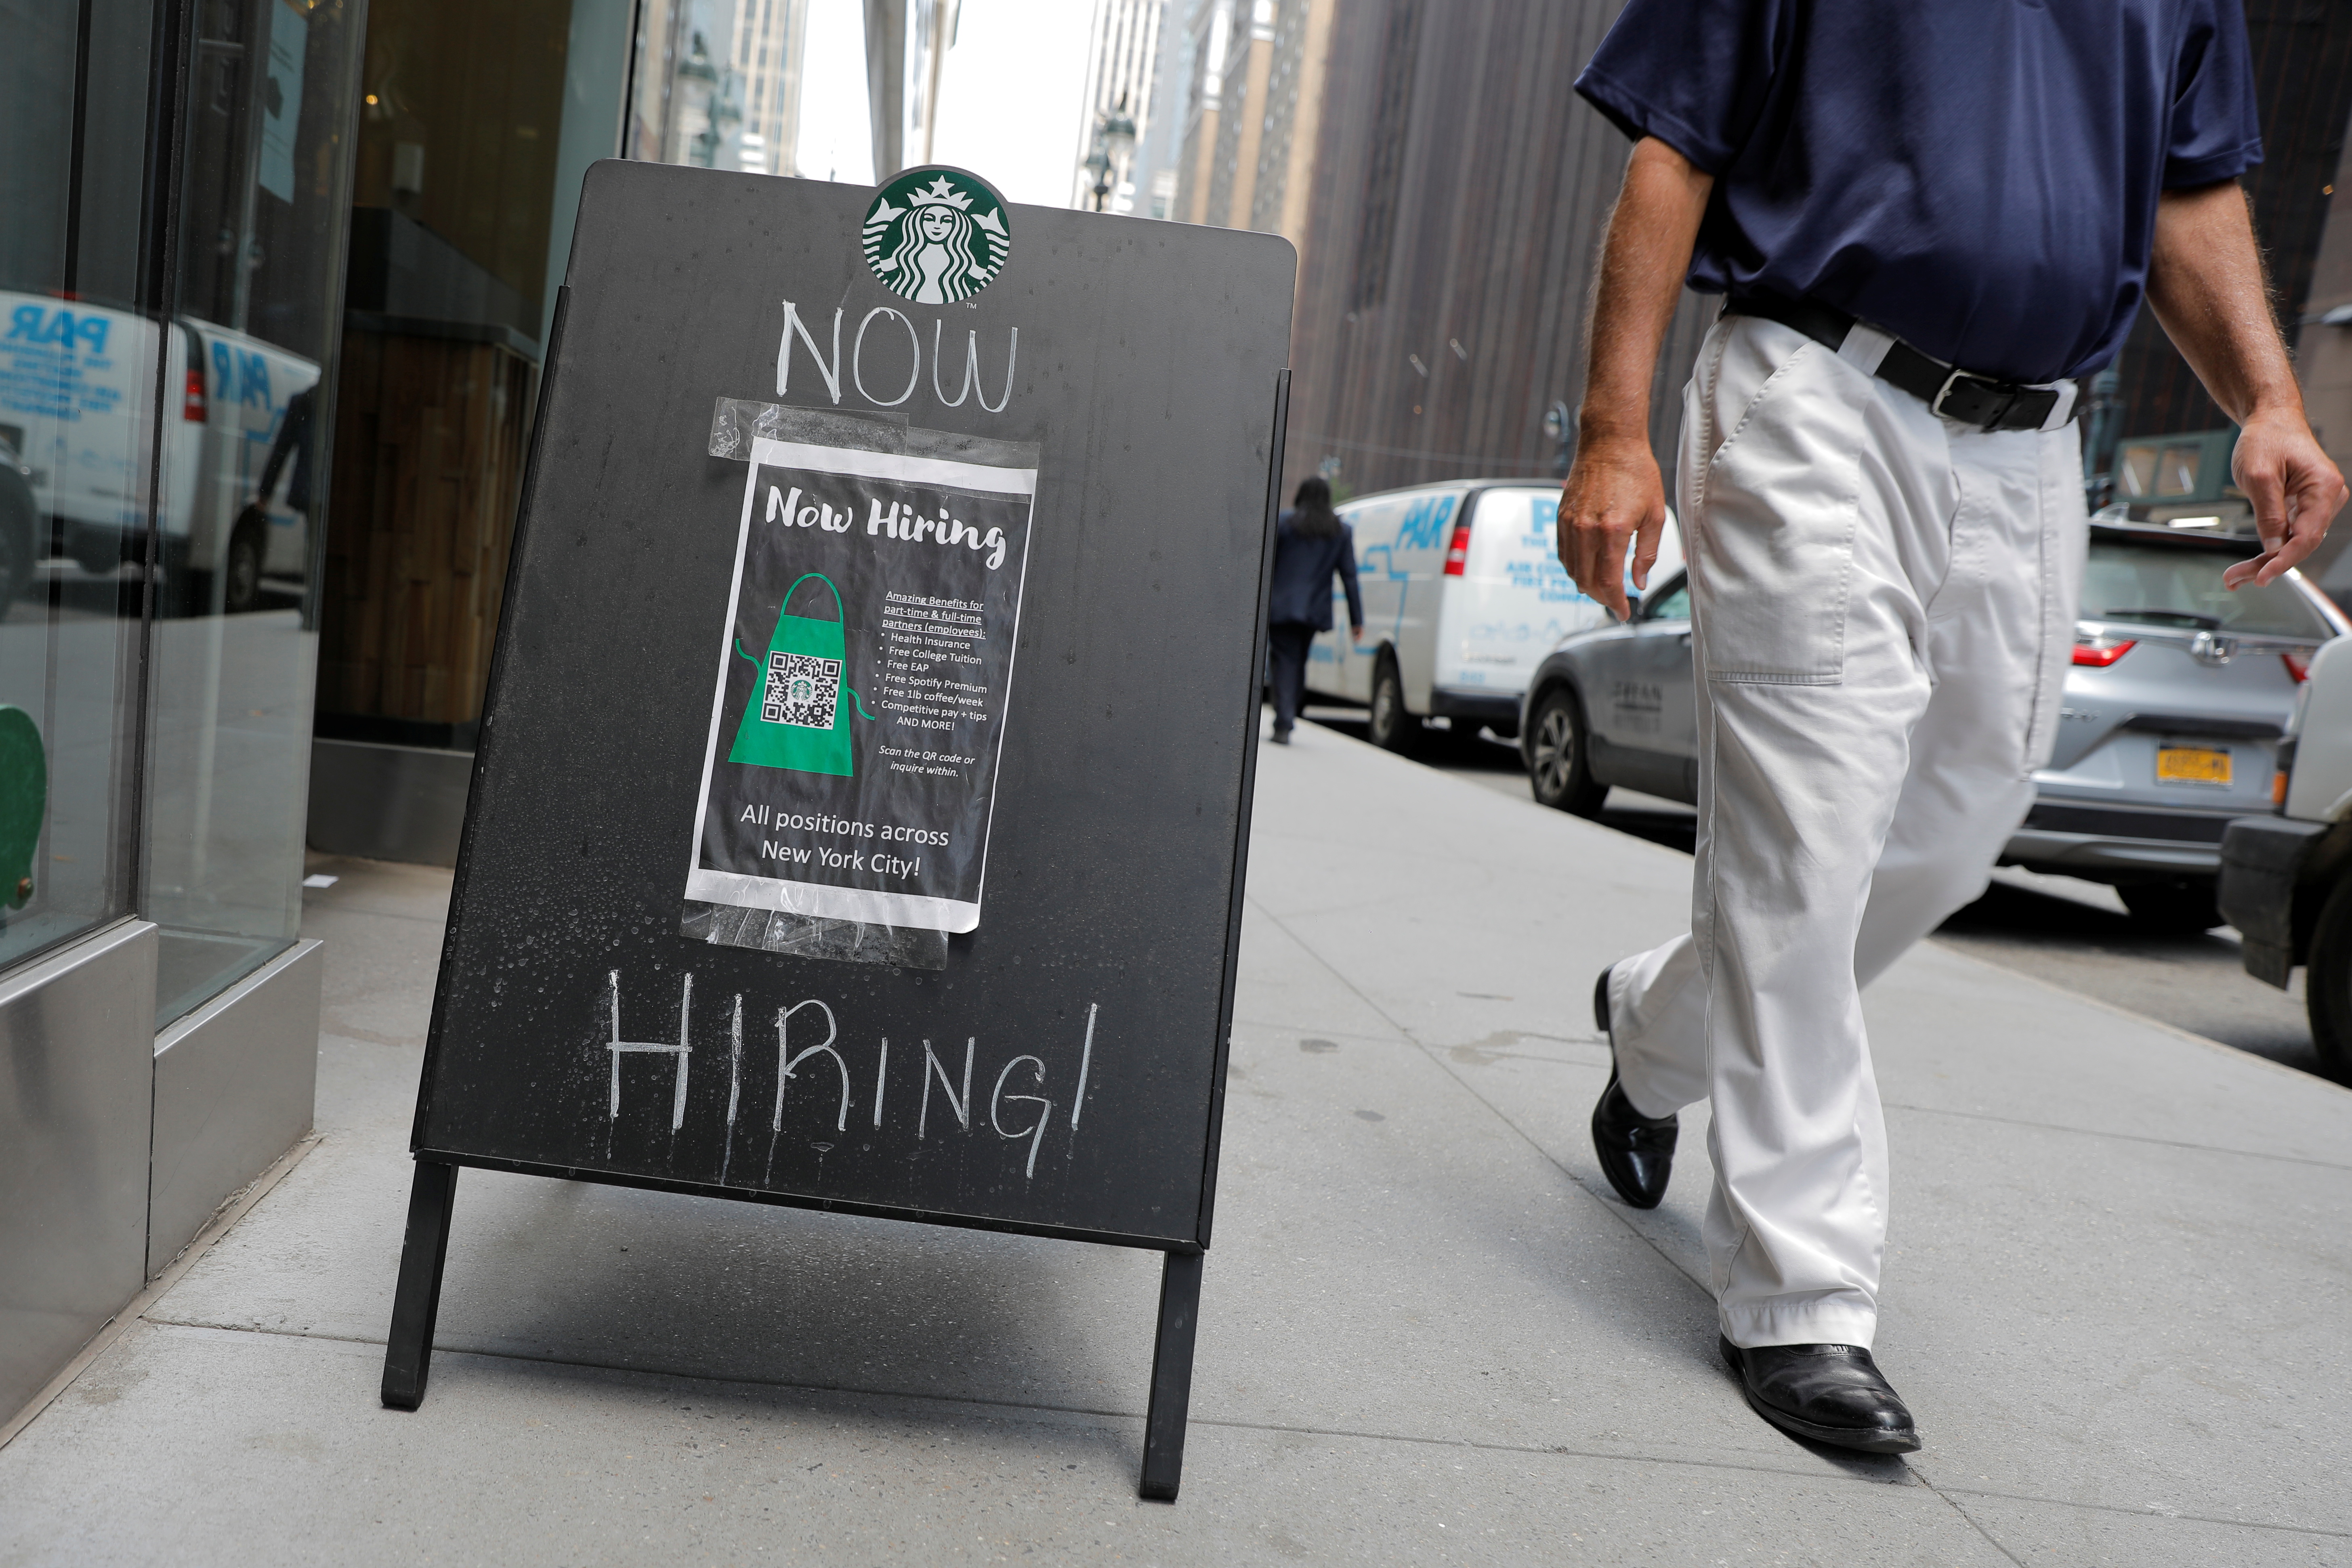 A sign advertising job openings is seen outside of a Starbucks in Manhattan, New York City, New York, U.S., May 26, 2021. REUTERS/Andrew Kelly